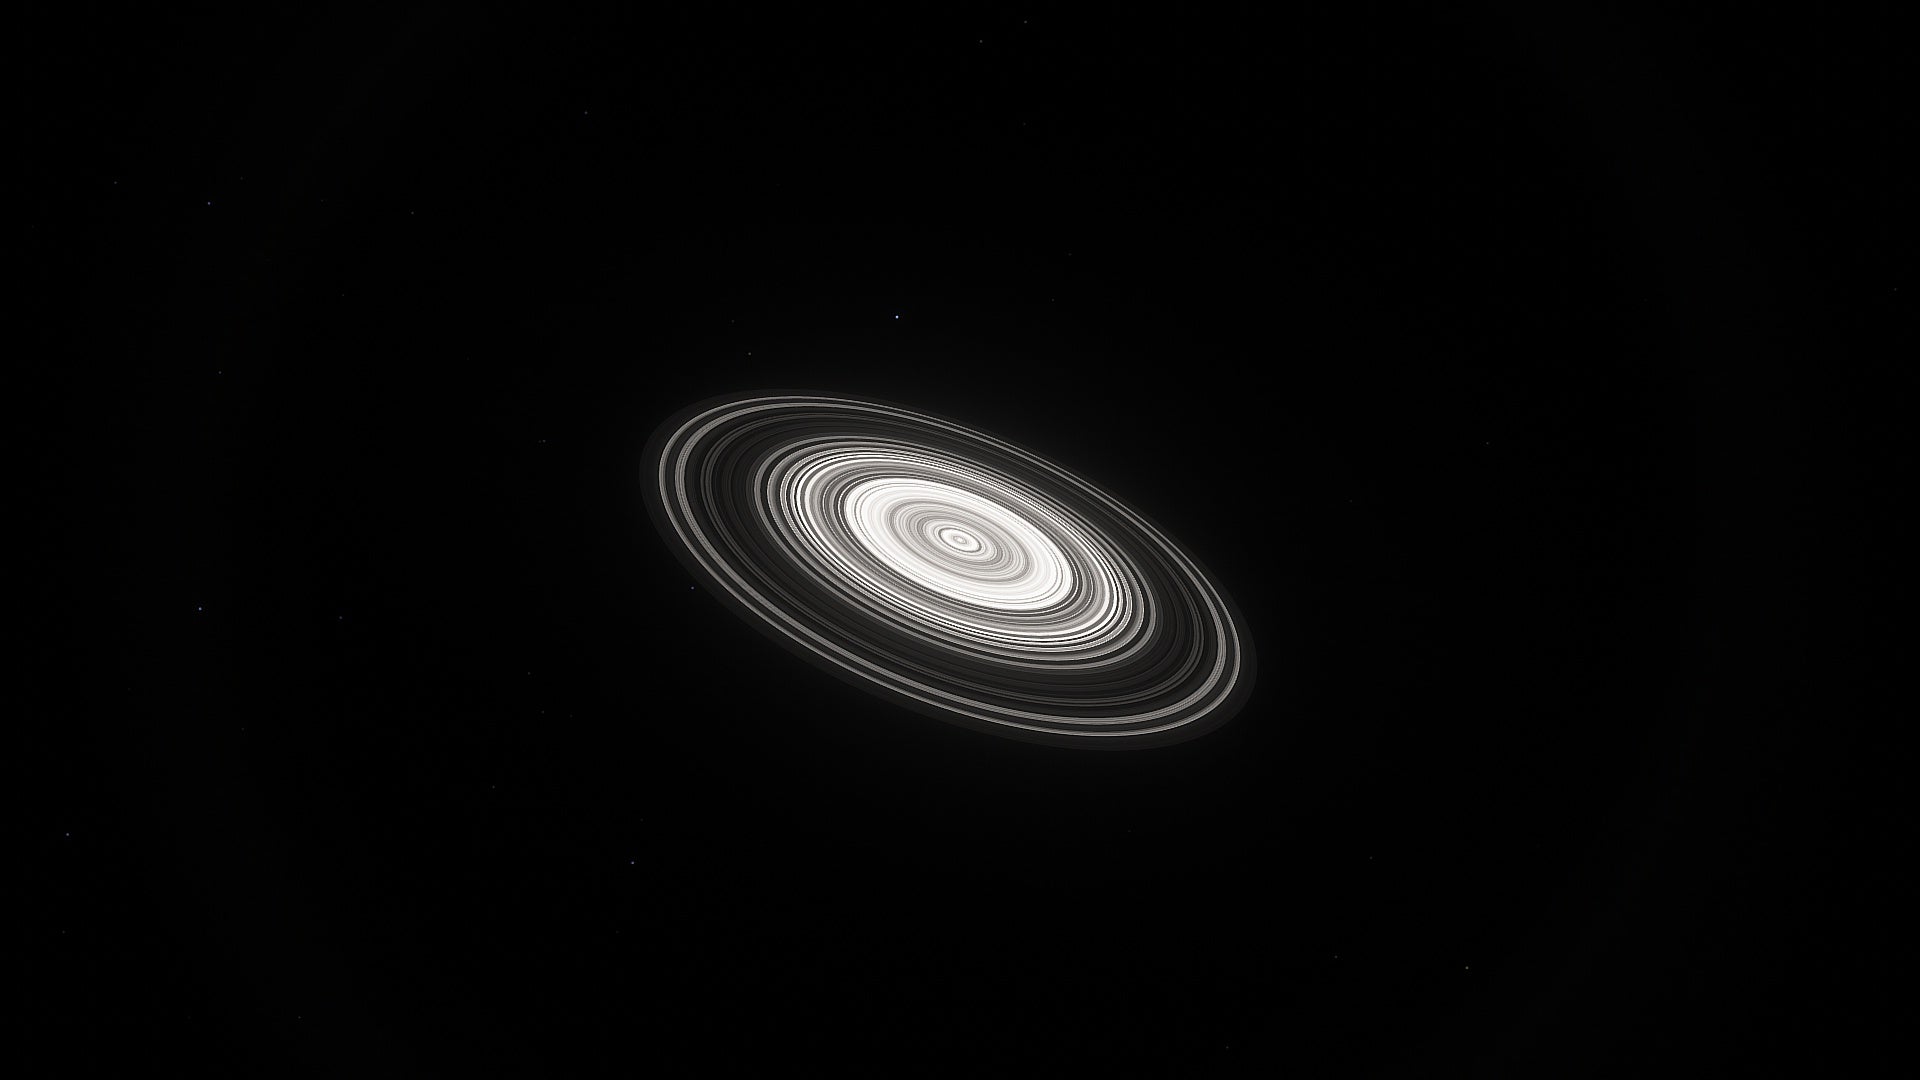 J1407b gas giant with a ring system with a diameter of .6 AU. If rings like this were placed around Saturn, it would absolutely dominate the night sky